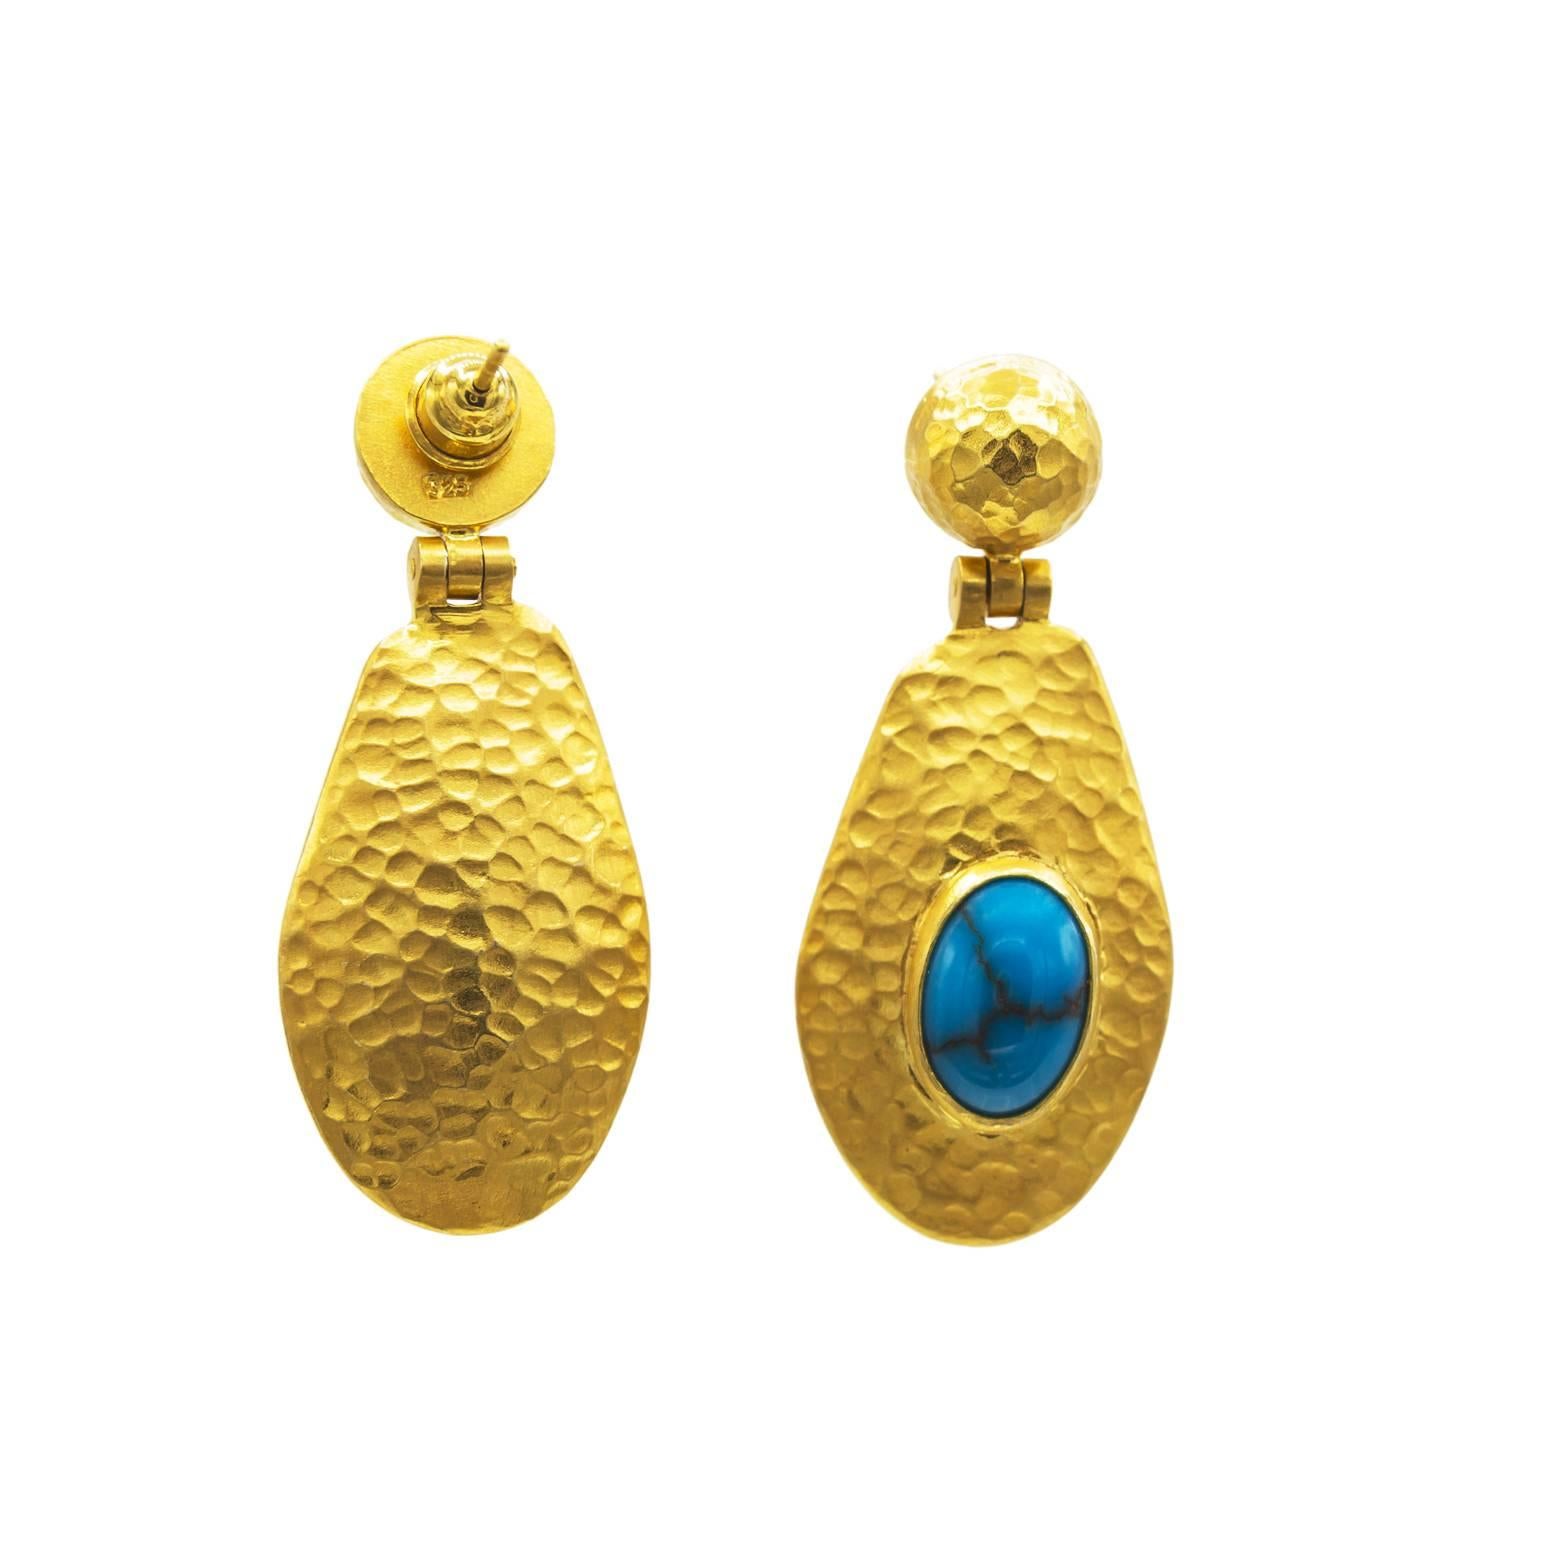 These unique Egyptian Turquoise earrings are rich in the deep color of turquoise that is luscious and royal. These earrings have movement and shine with the hammered texture and hinge attachment. They are lightweight and elegant. The vermeil is very